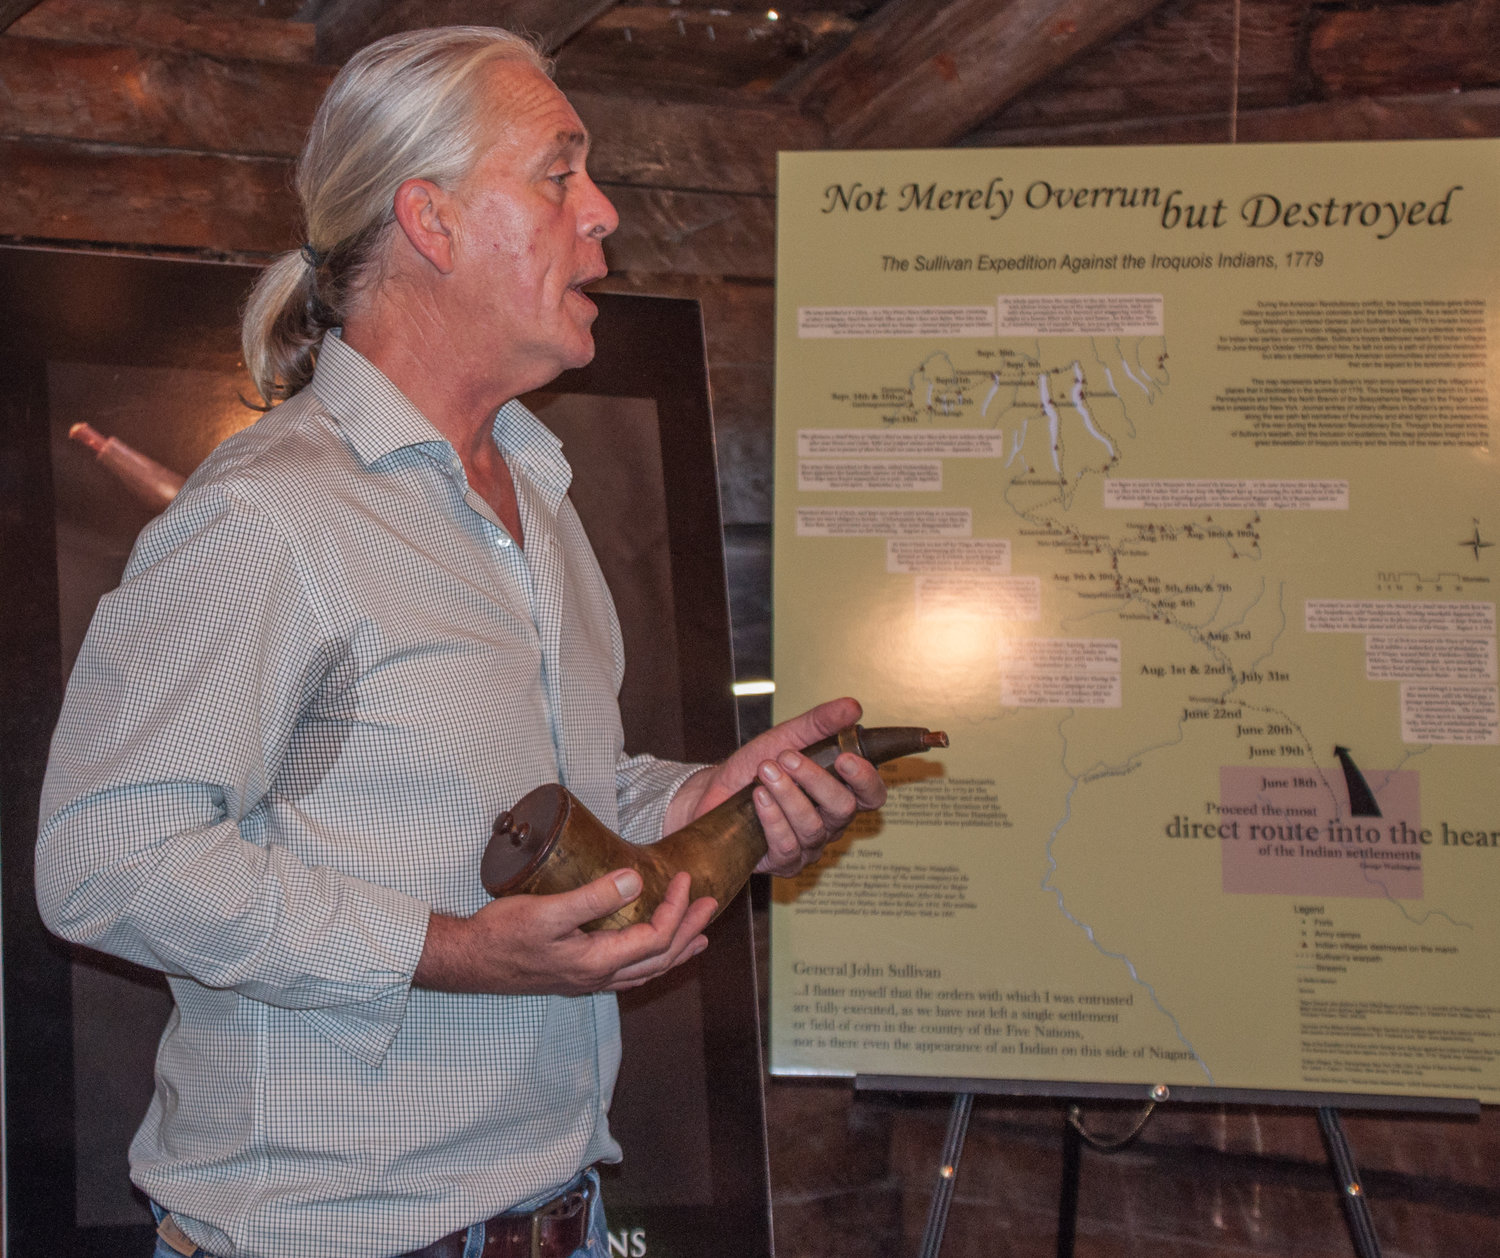 Richard Jenkins was at the Fort Delaware Museum of Colonial History last Saturday to relate the fascinating story of his ancestor's powder horn and its significance.